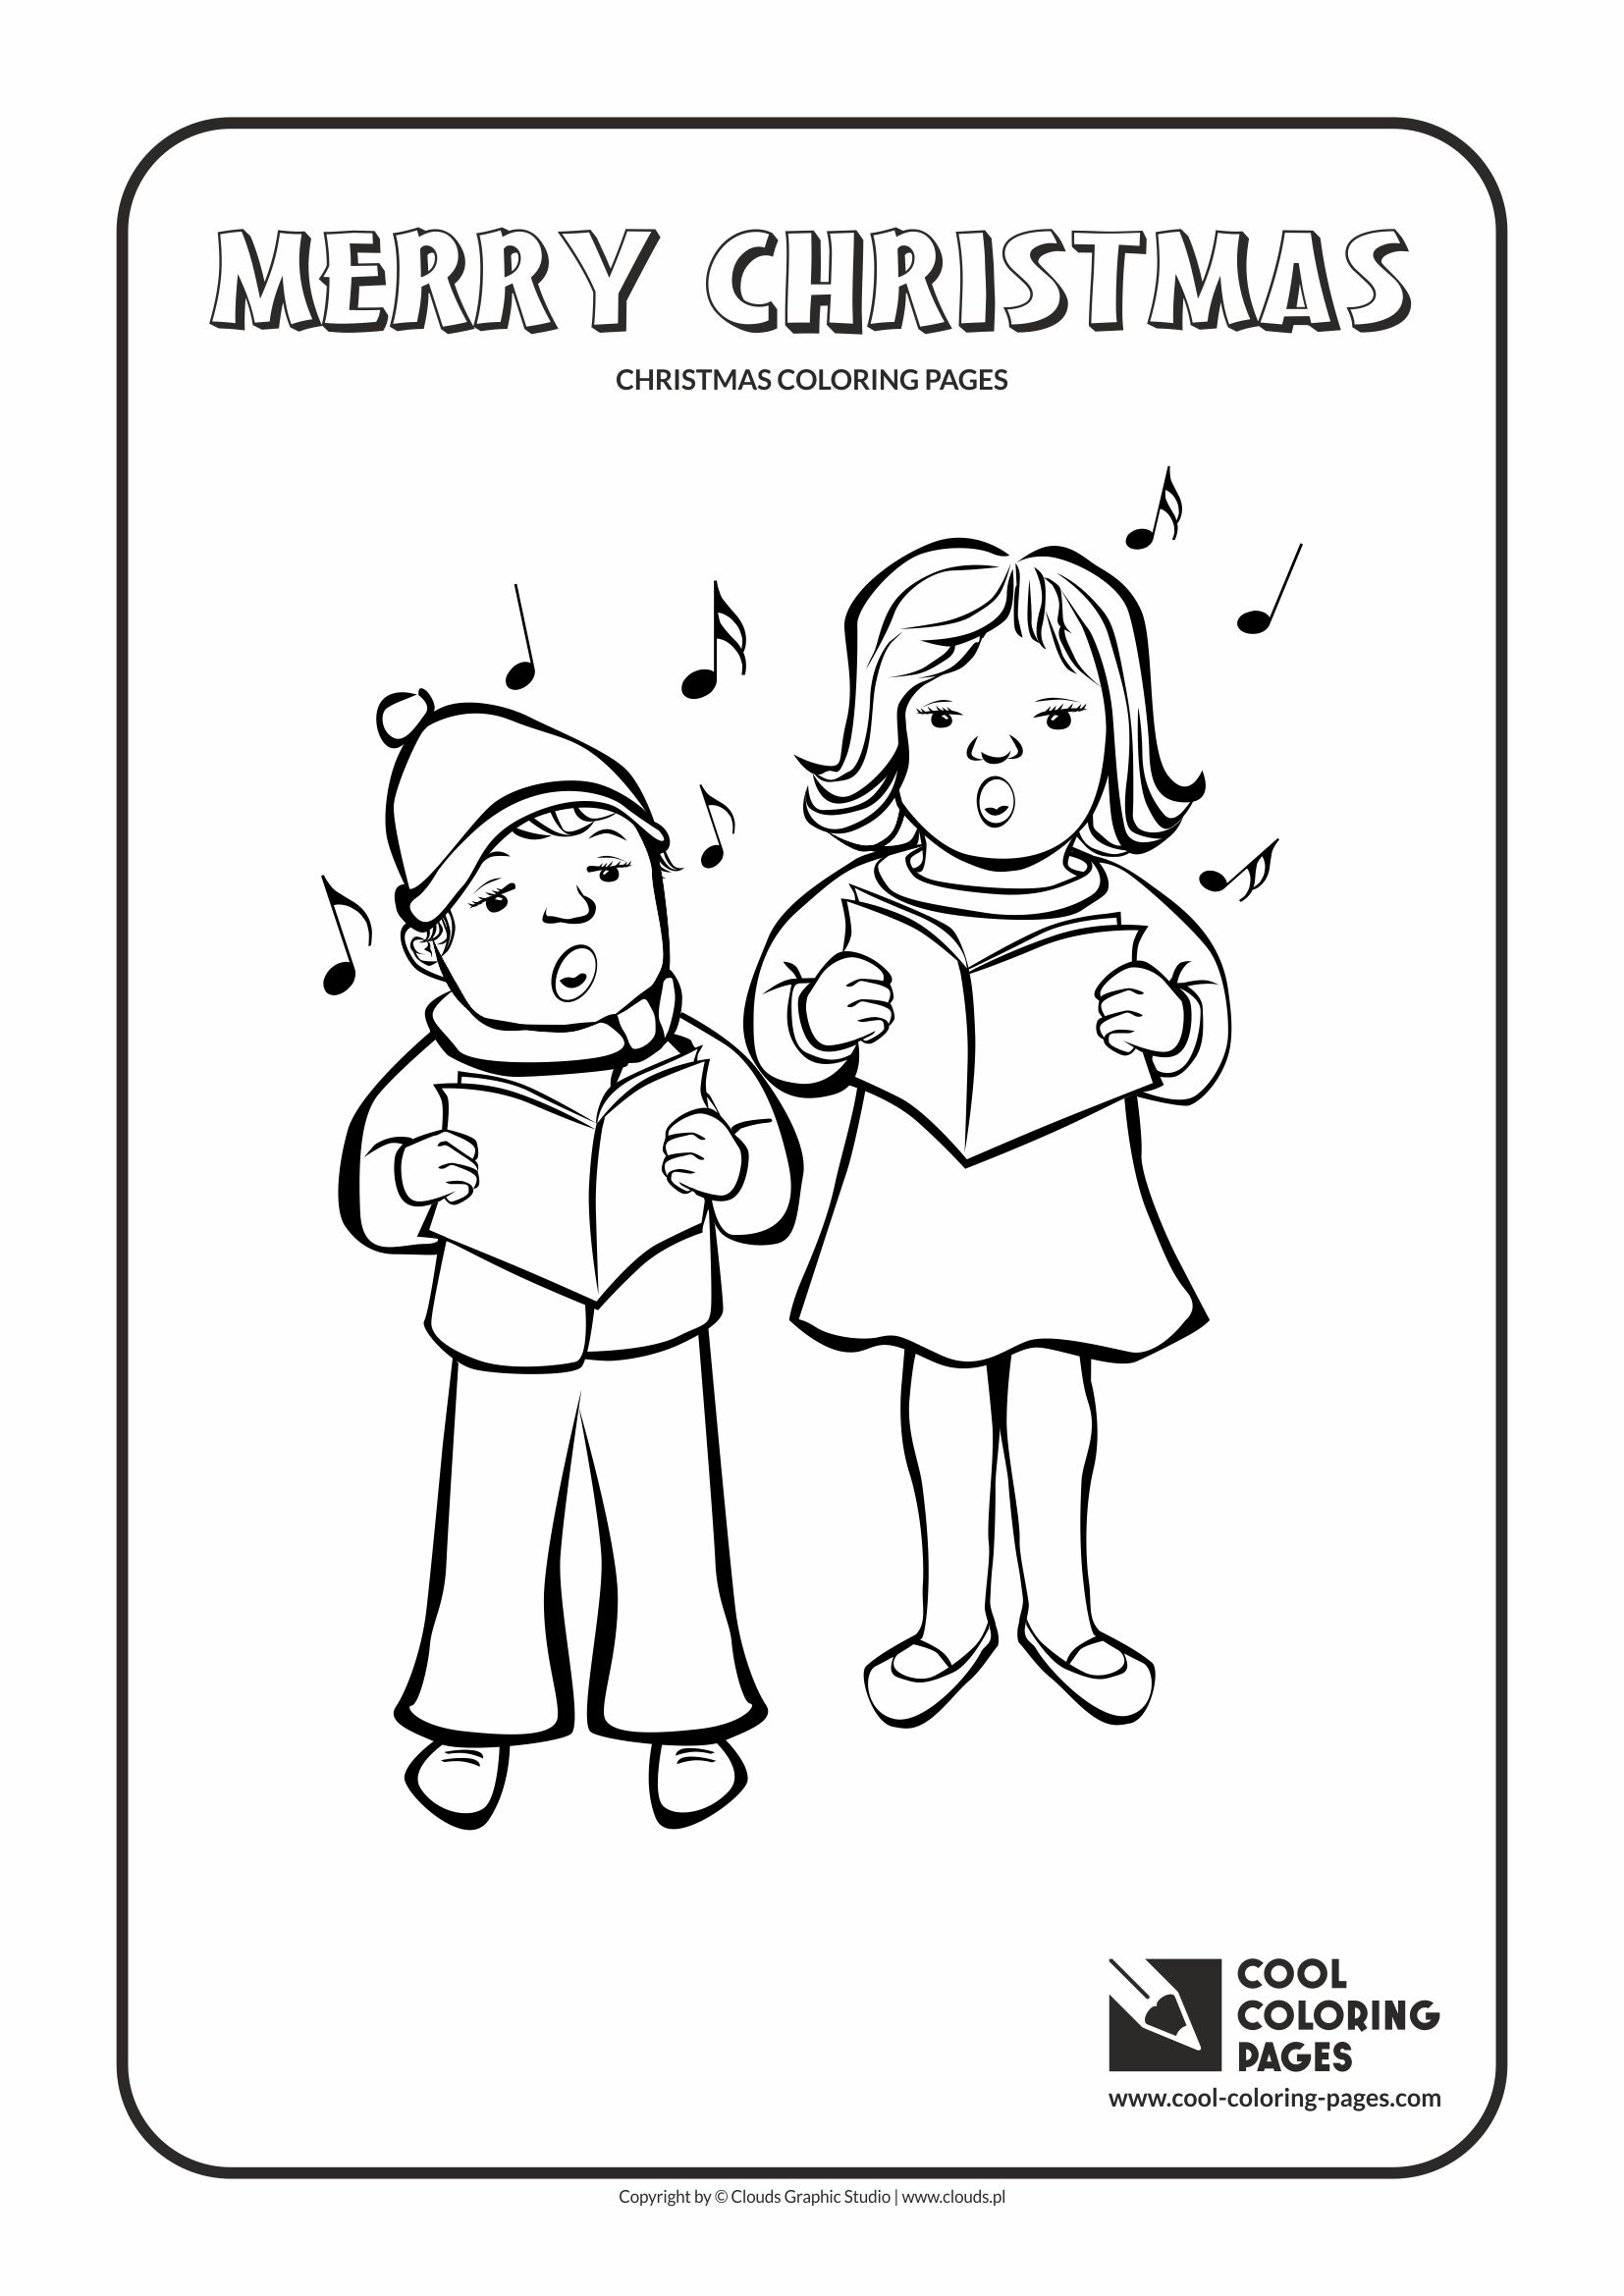 Cool Coloring Pages Christmas coloring pages - Cool Coloring Pages